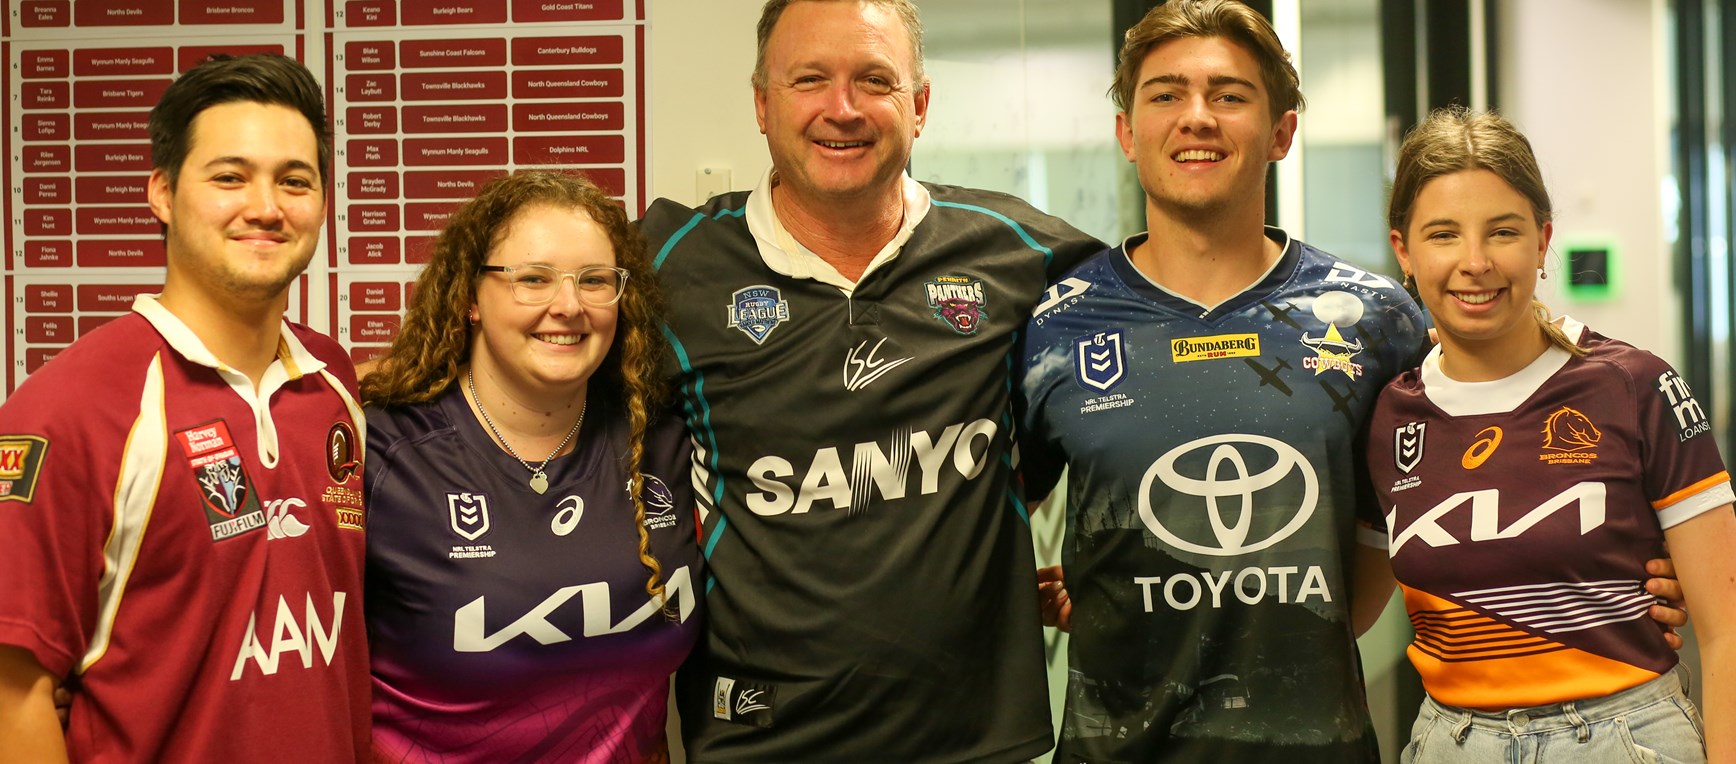 In pictures: Jersey Day at QRL